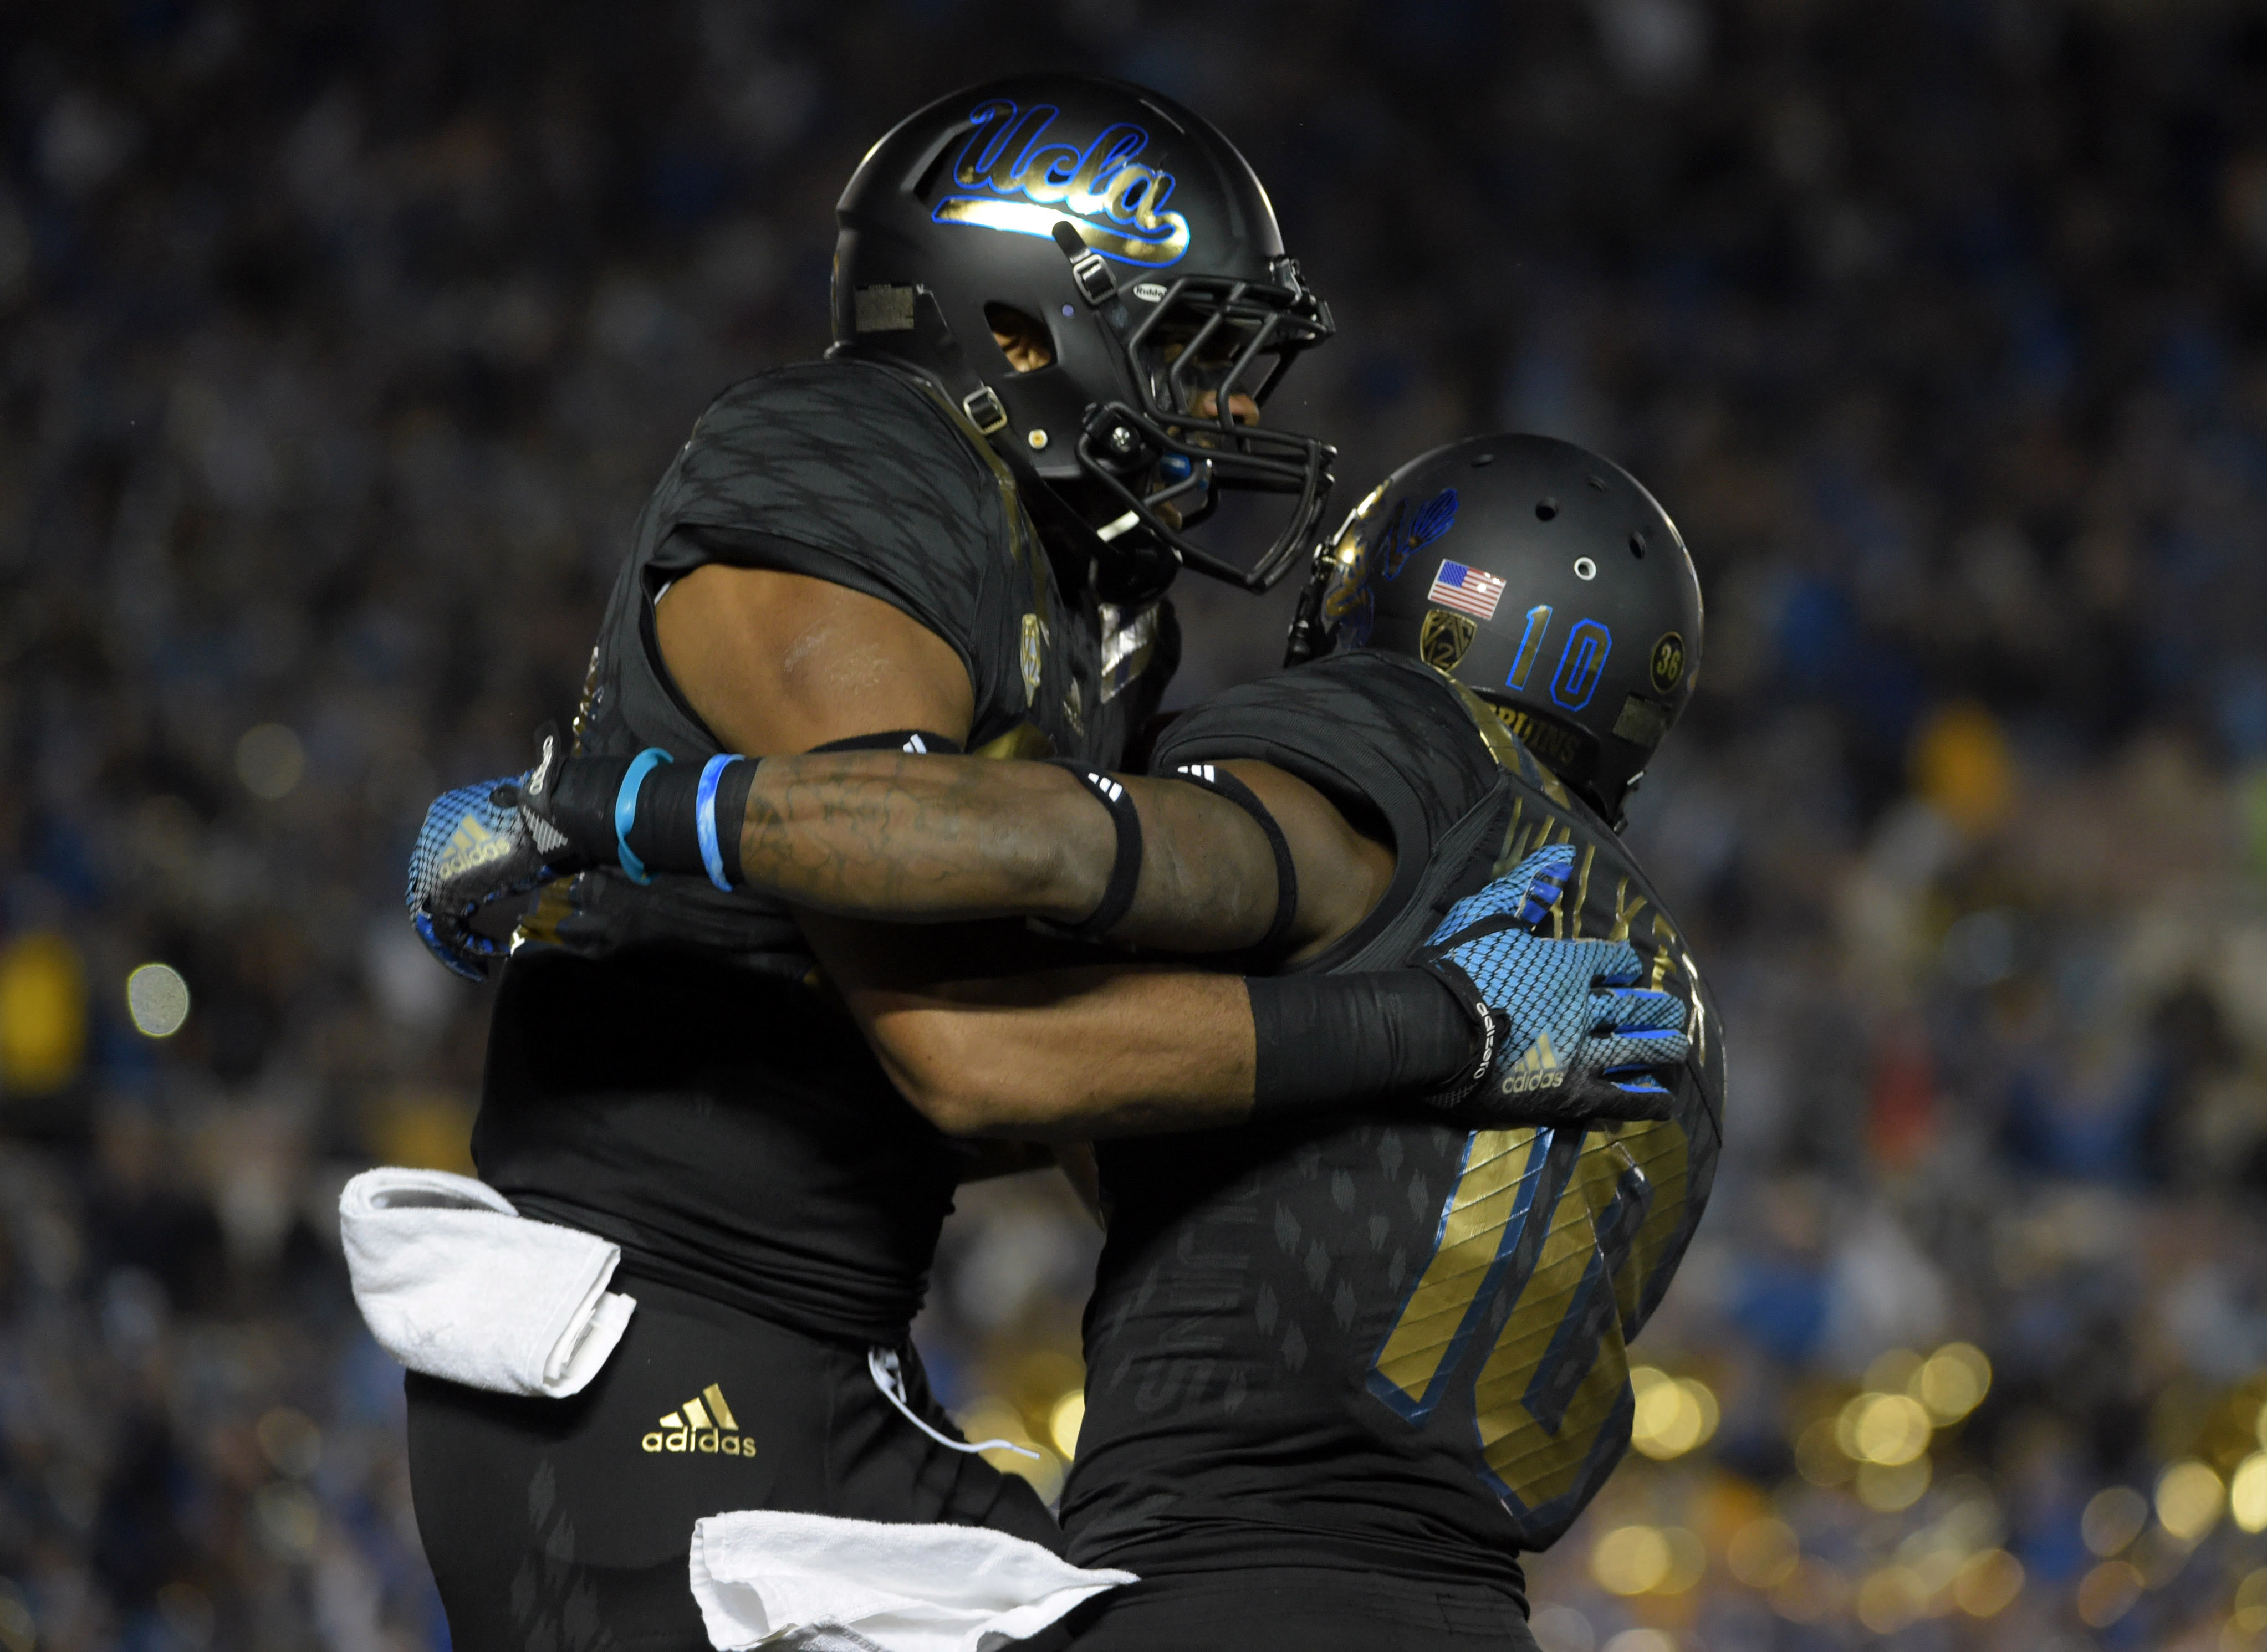 Nov 14, 2015; Pasadena, CA, USA; UCLA Bruins running back Nate Starks (23) celebrates with receiver Kenneth Walker III (10) after scoring on a 14-yard touchdown run in the second quarter against the Washington State Cougars in a NCAA football game at Rose Bowl. (Kirby Lee/USA TODAY Sports)